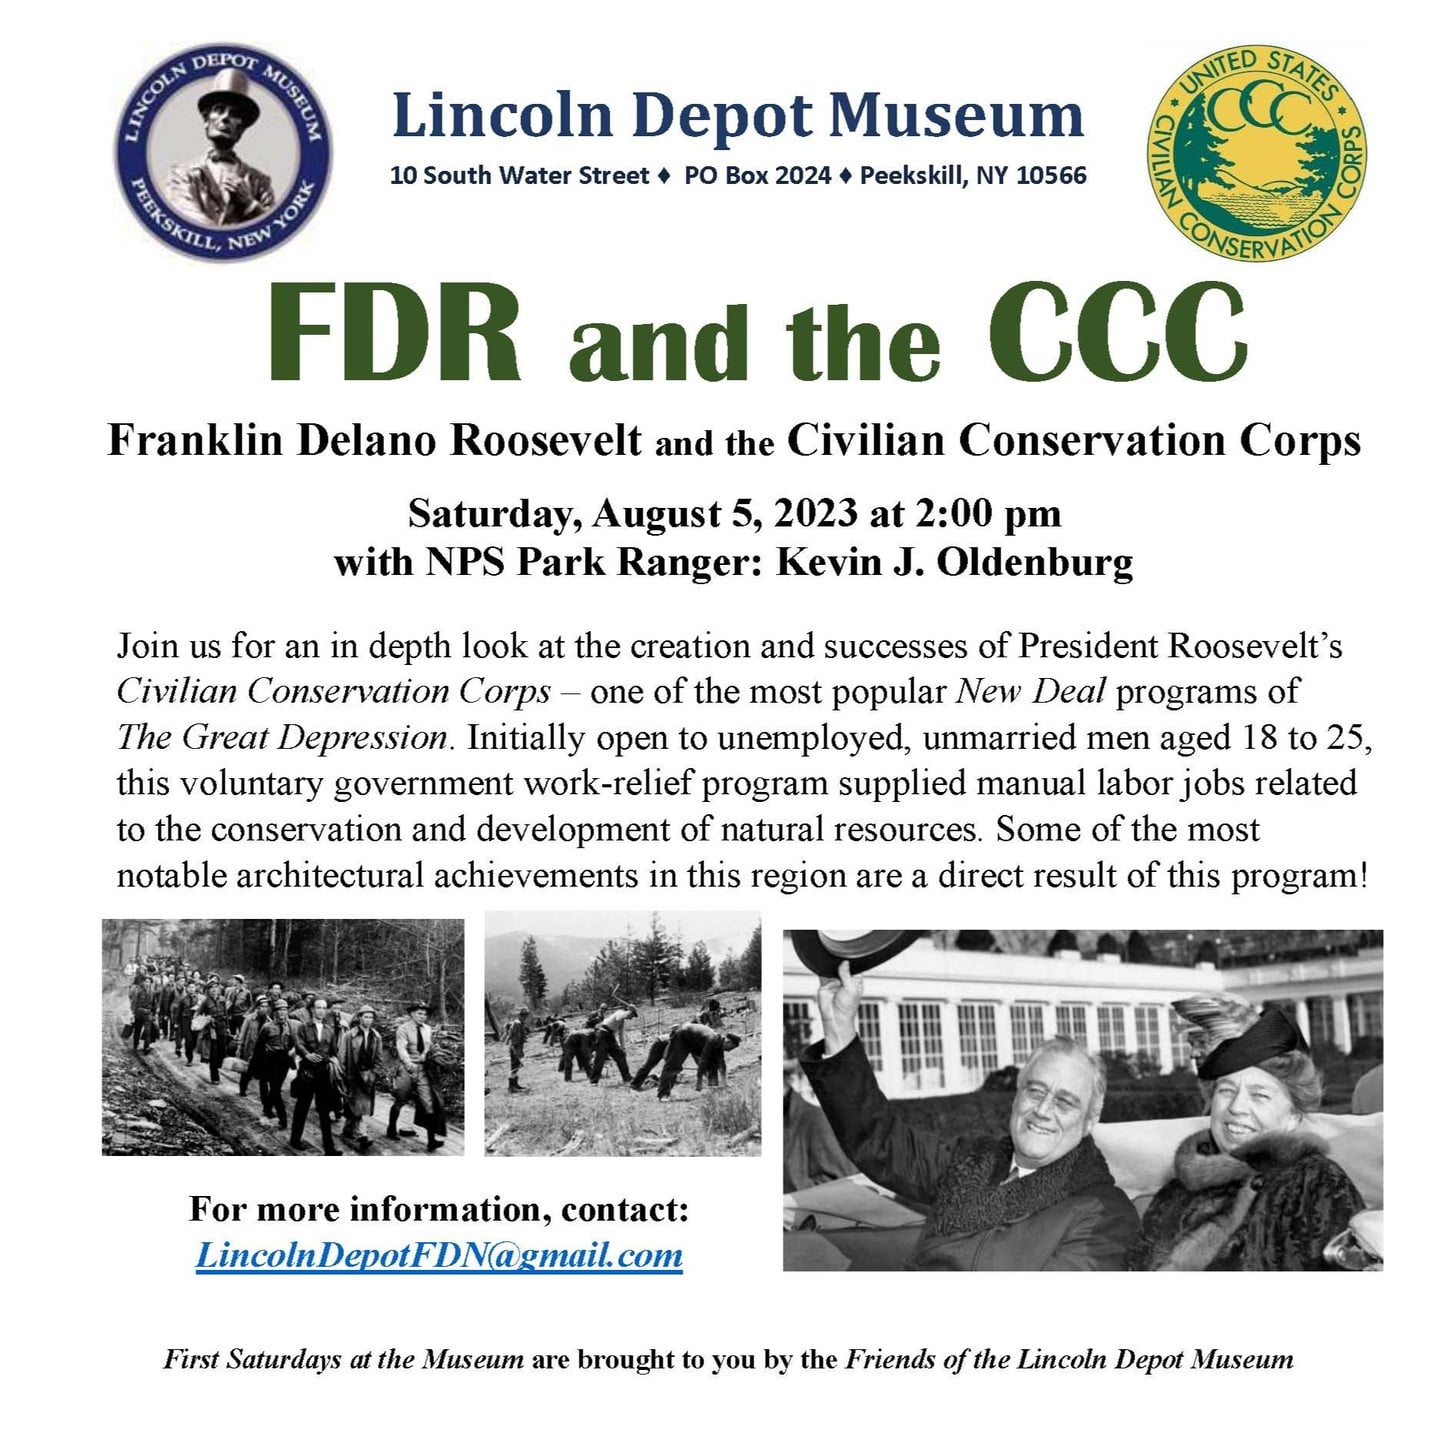 Flier for FDR and the CCC at the Lincoln Depot Museum